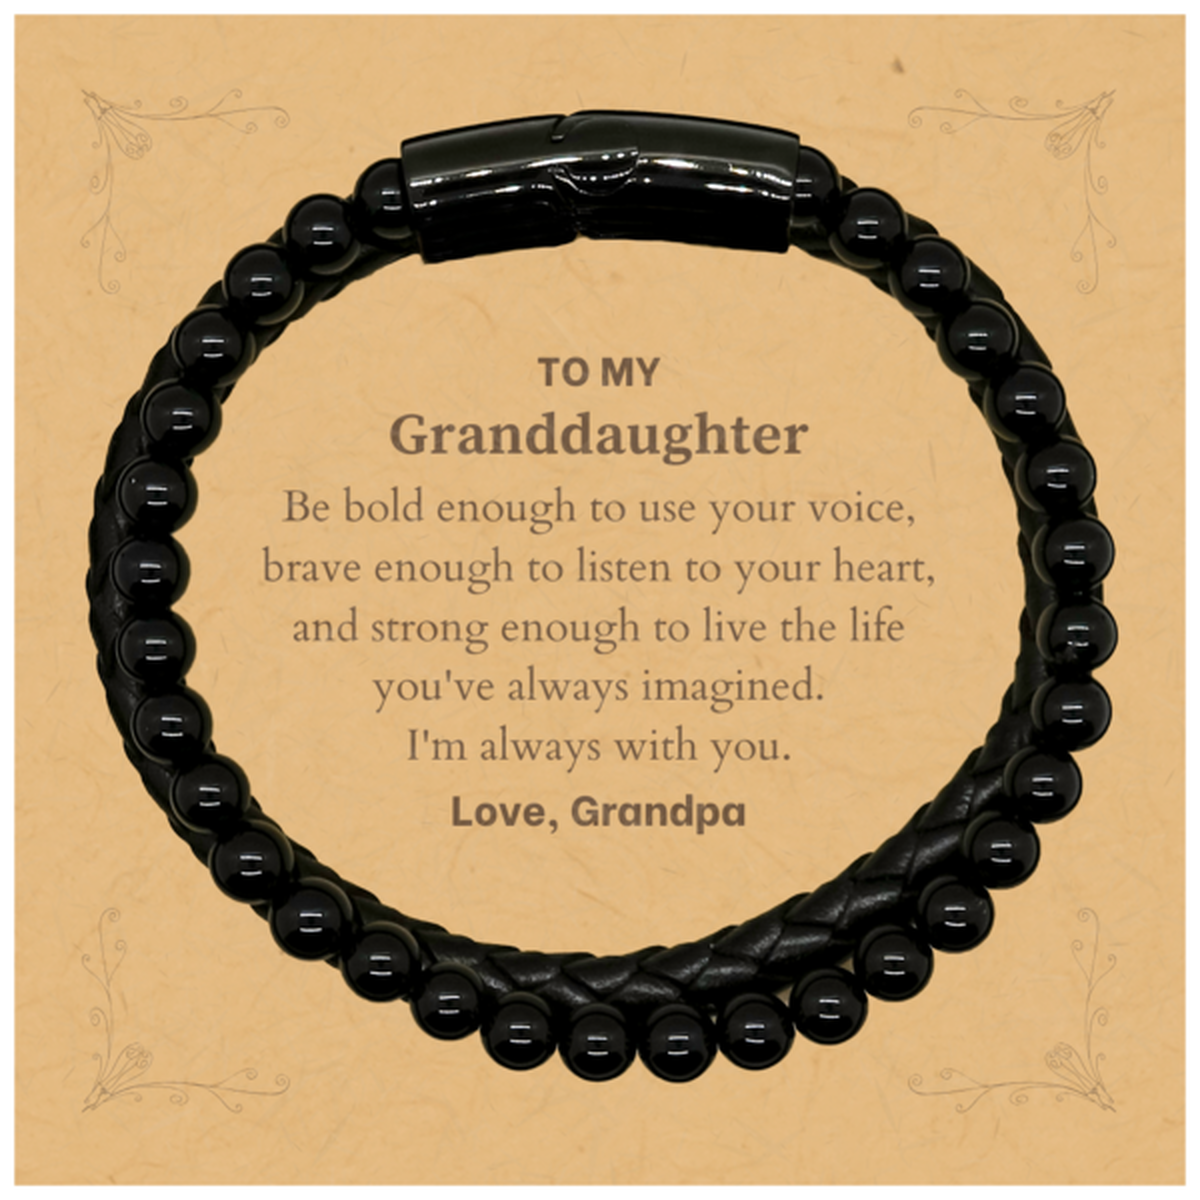 Keepsake Granddaughter Stone Leather Bracelets Gift Idea Graduation Christmas Birthday Granddaughter from Grandpa, Granddaughter Be bold enough to use your voice, brave enough to listen to your heart. Love, Grandpa